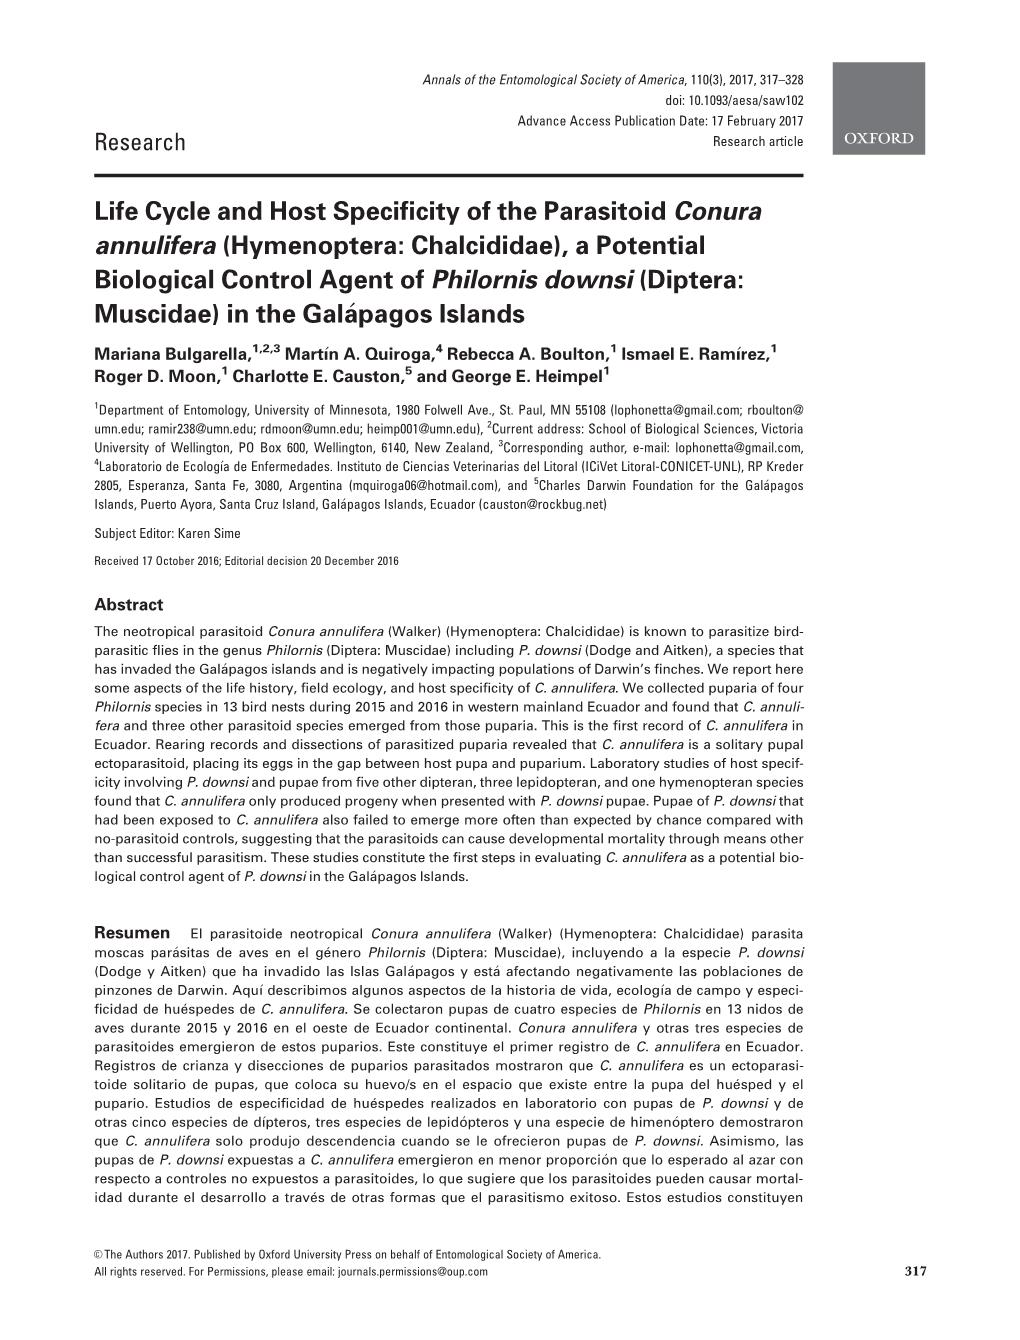 Life Cycle and Host Specificity of the Parasitoid Conura Annulifera